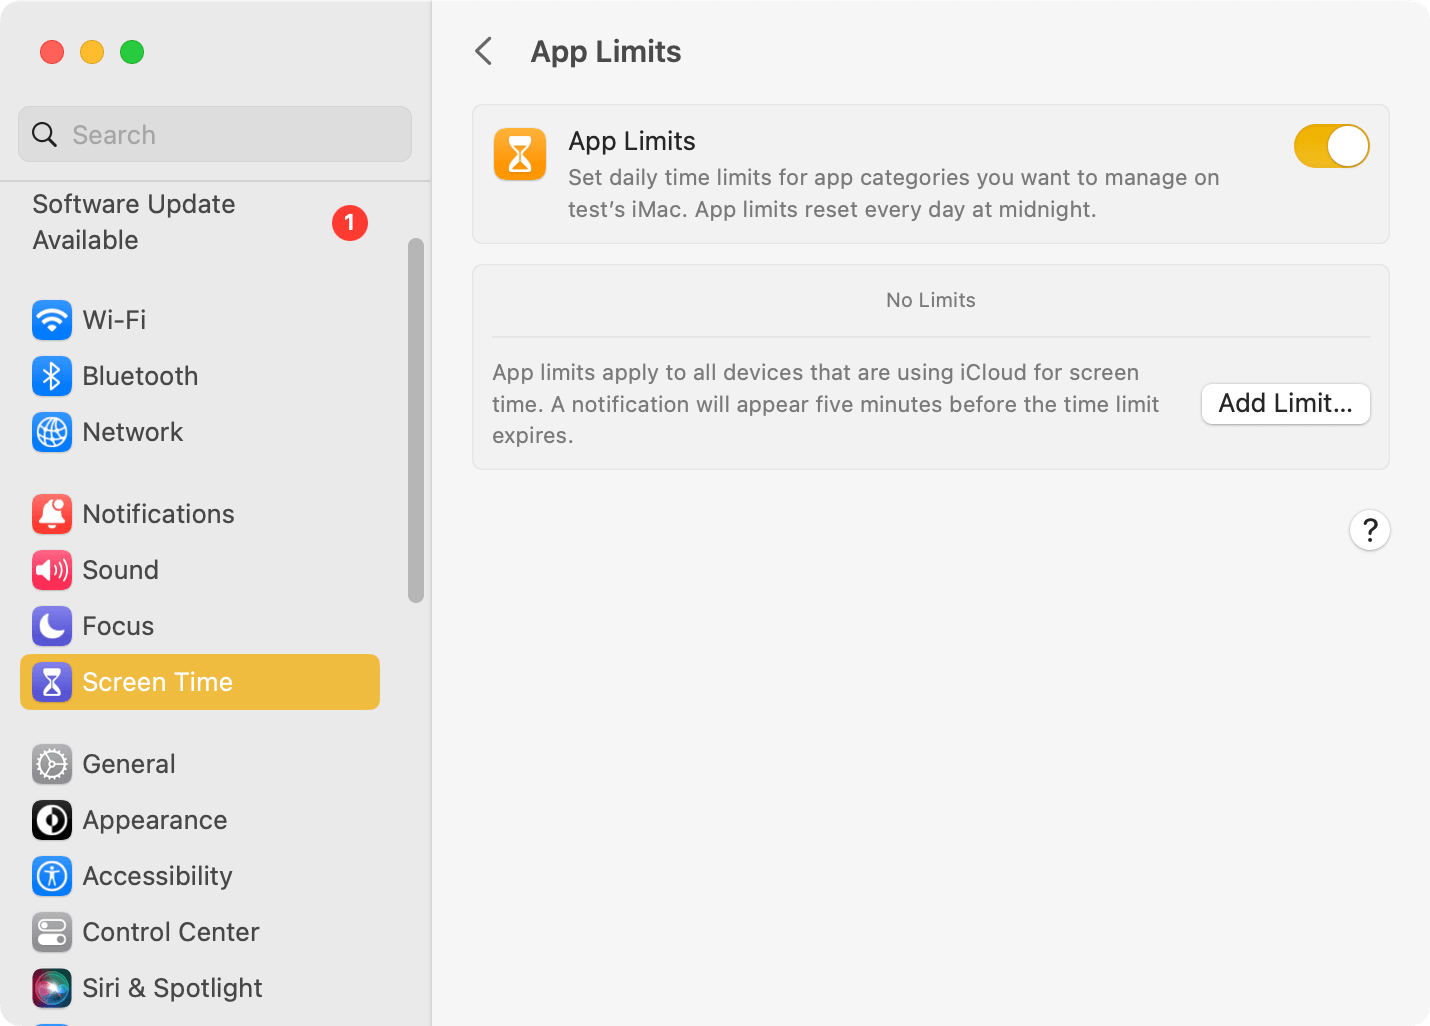 App Limits is turned on